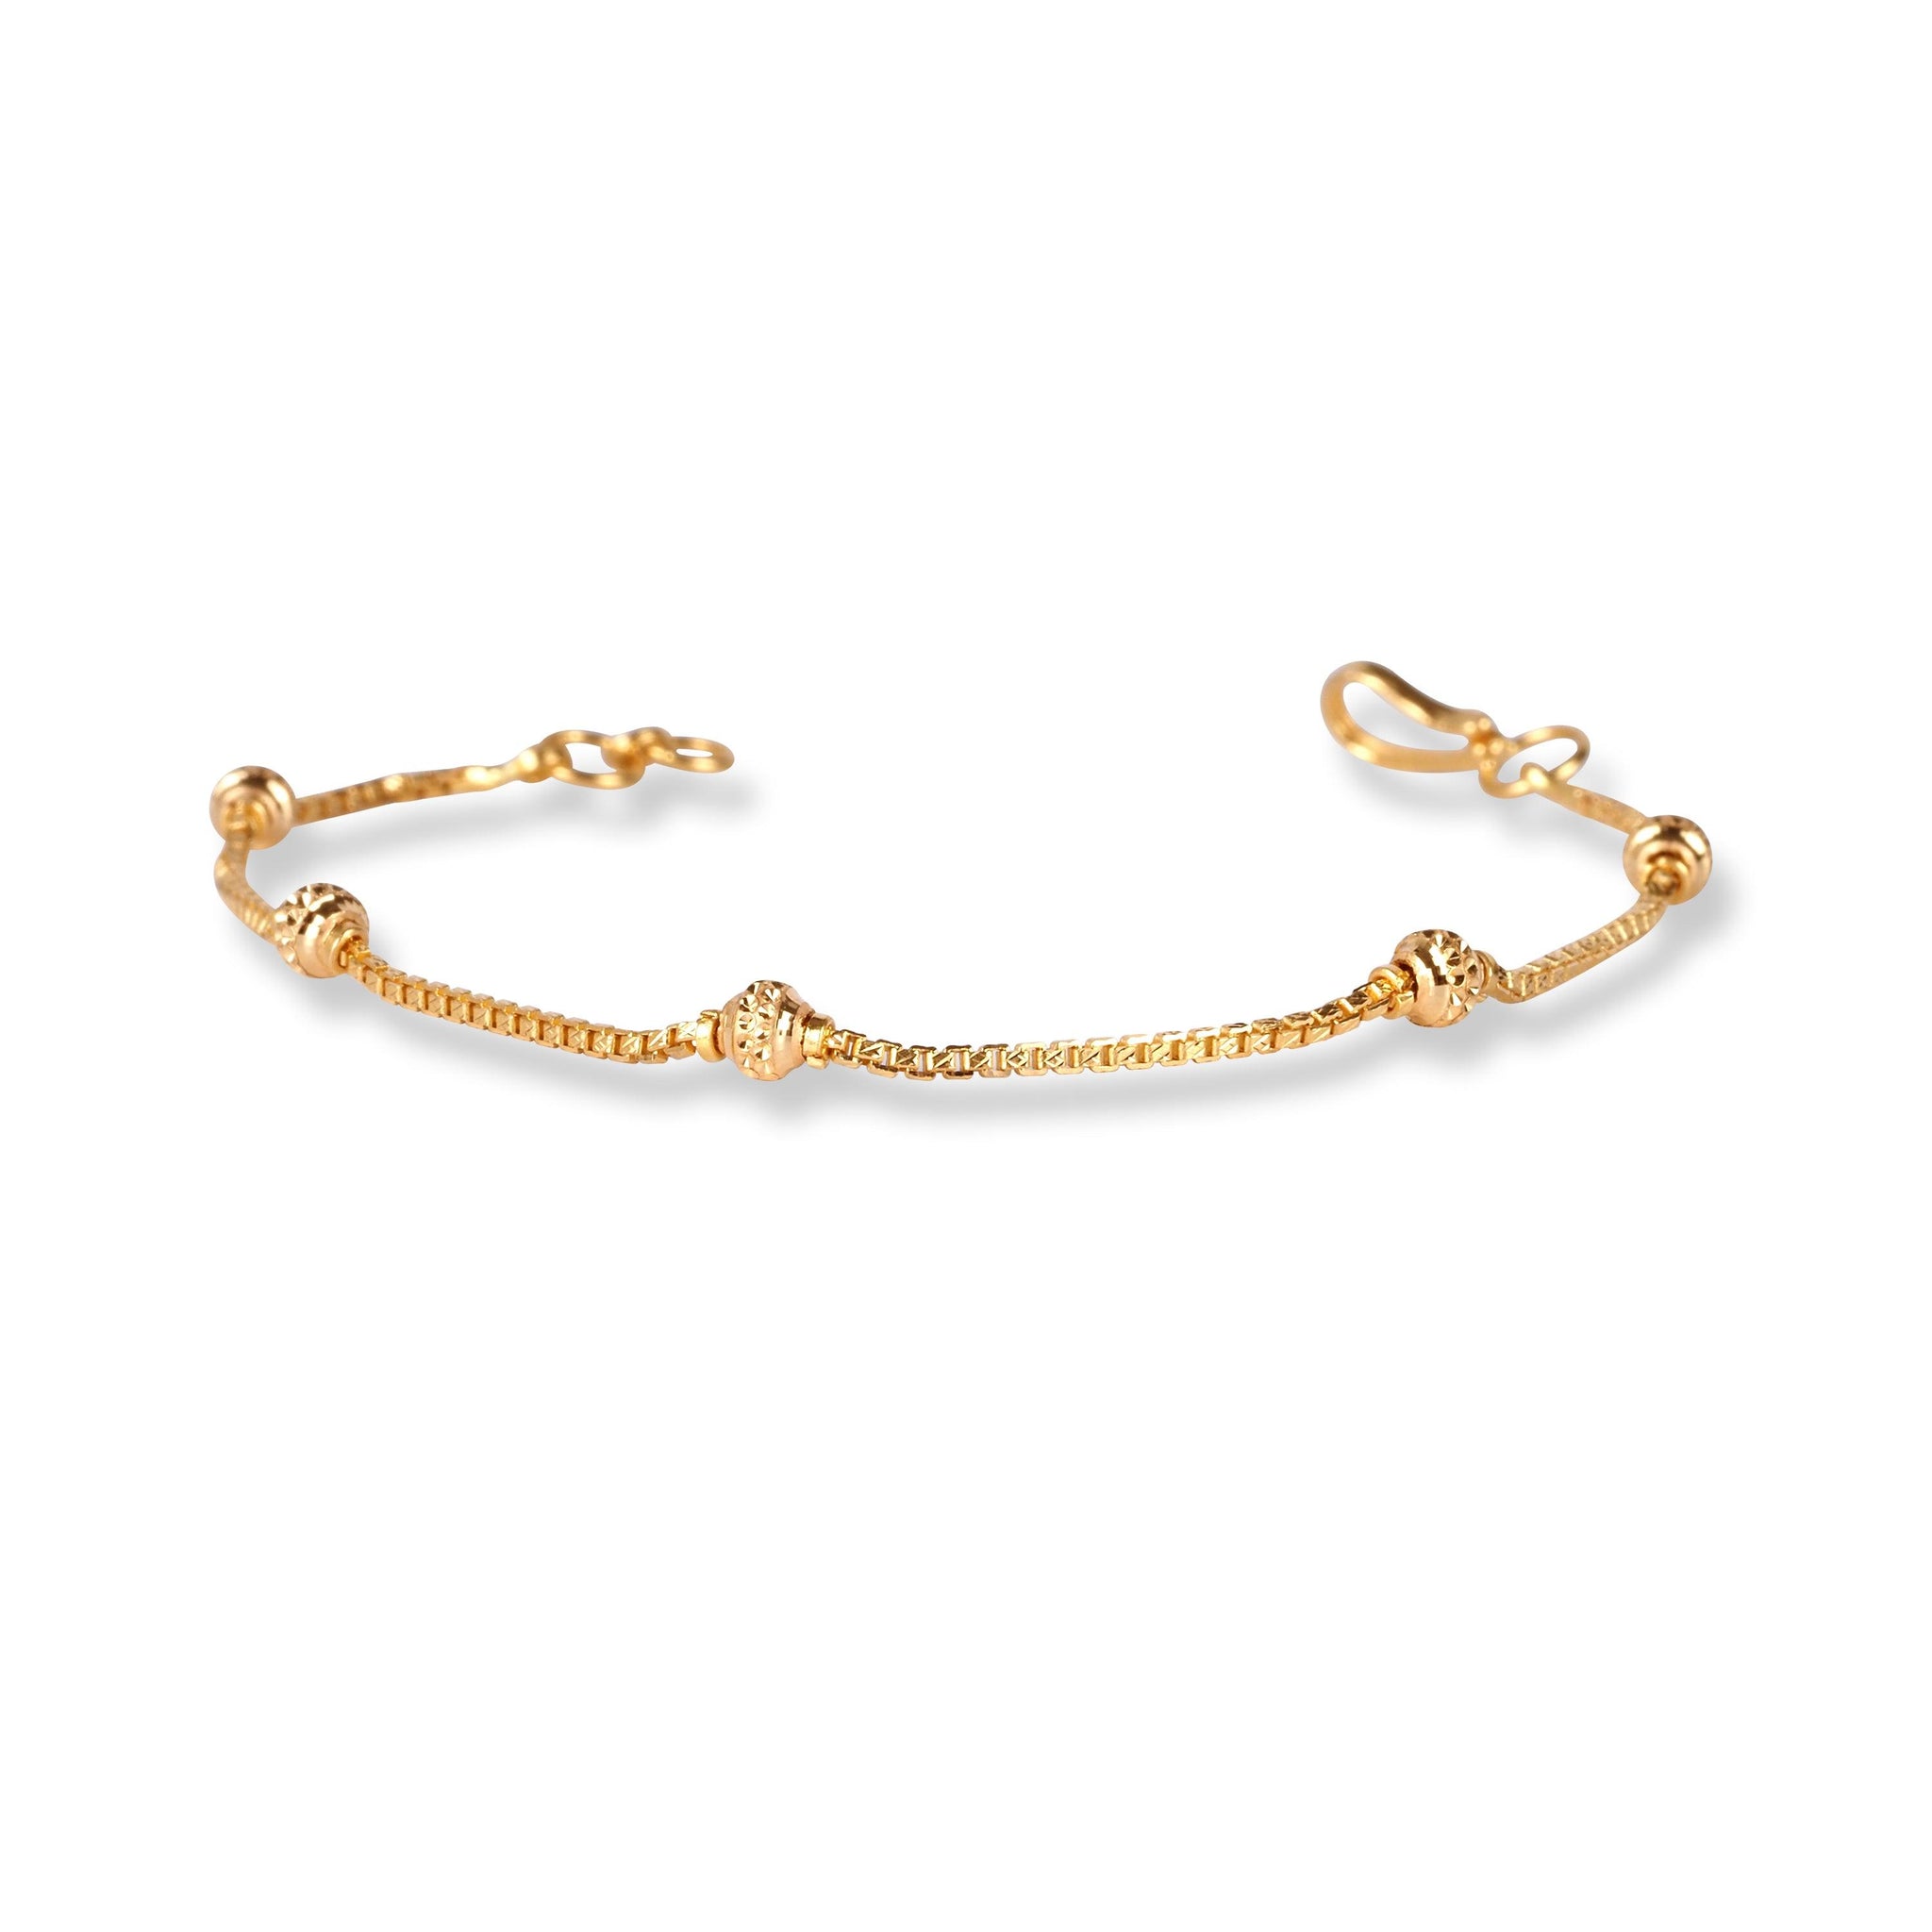 22ct Gold Box Chain Bracelet With Diamond Cut Beads and Hook Clasp LBR-7161